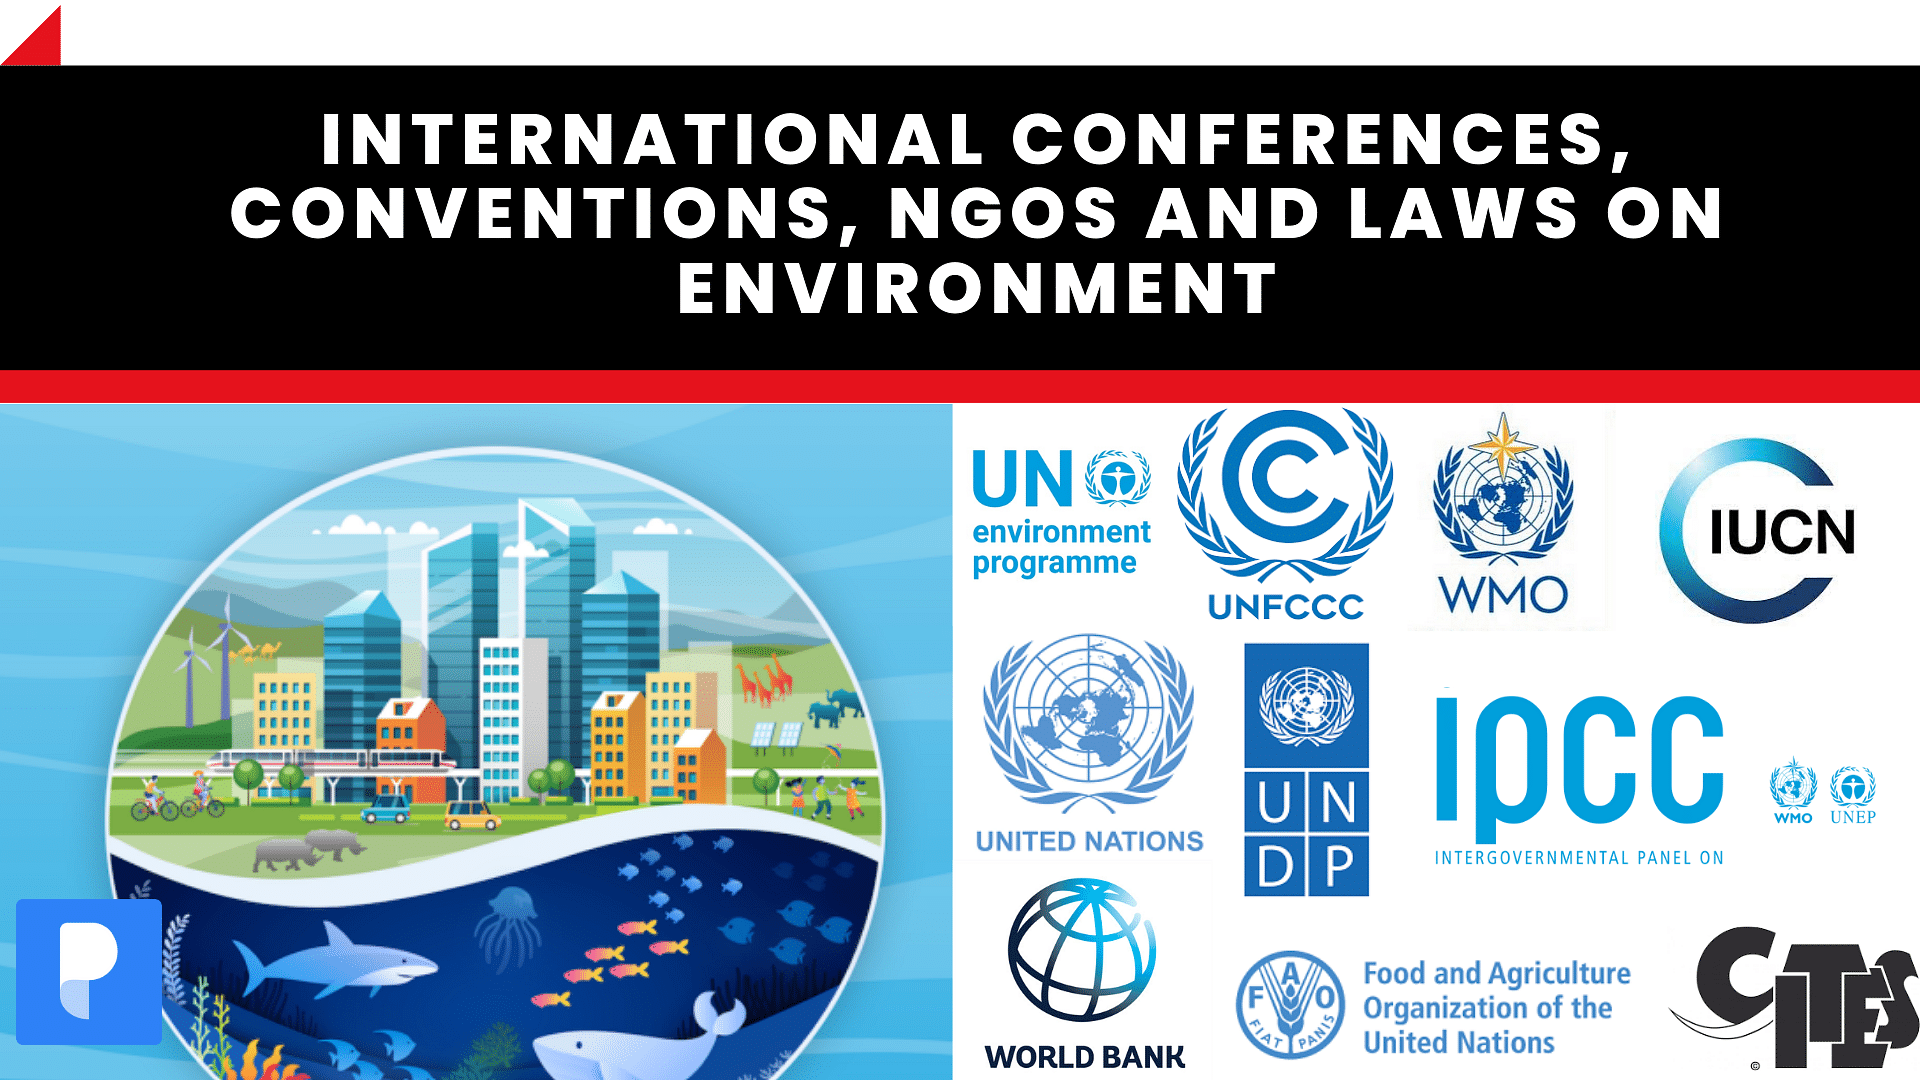 International Conferences, Conventions, NGOs and Laws on Environment